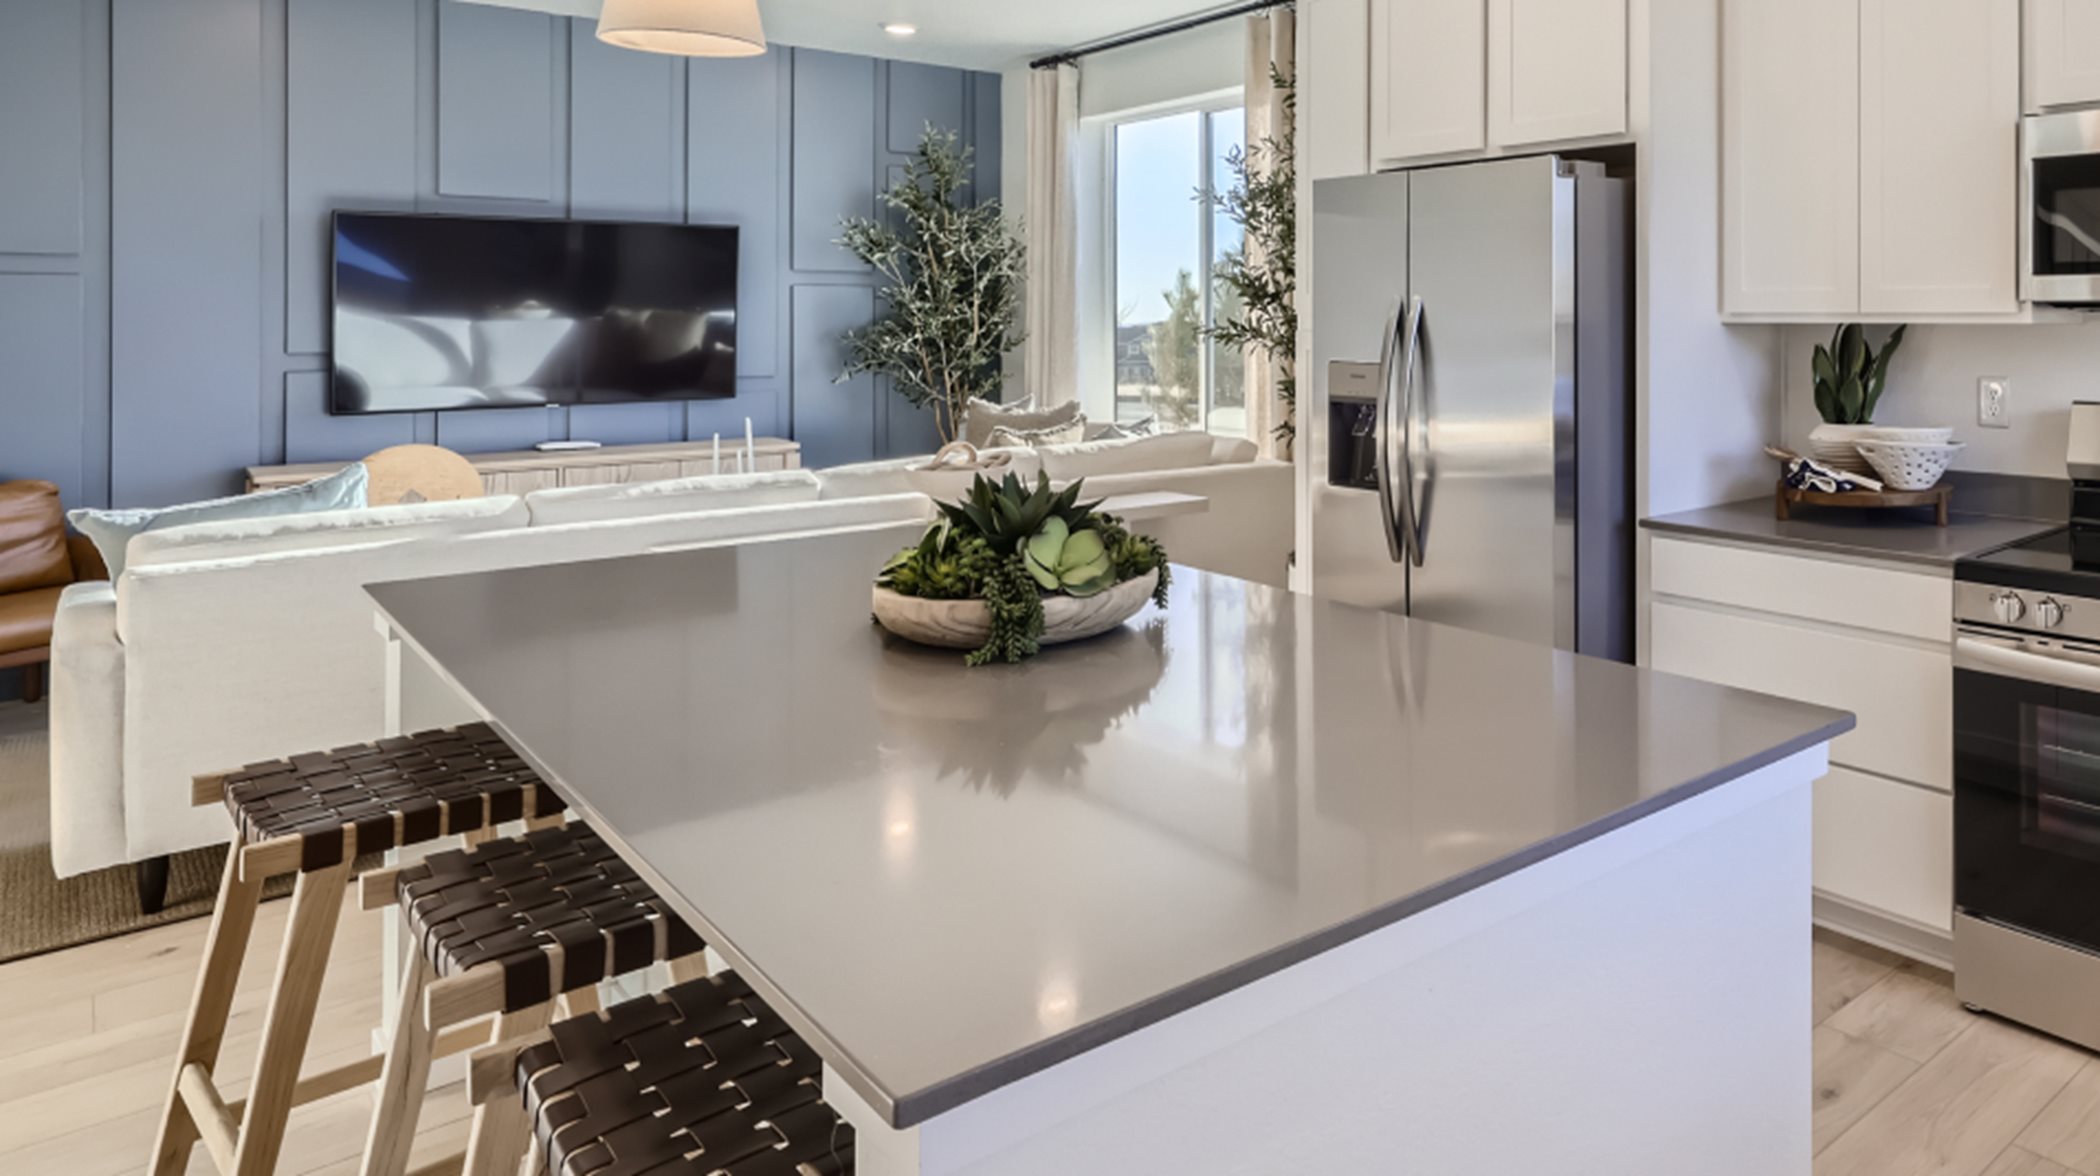 Sleek quartz countertops offer a heat and stain-resistant surface in kitchen